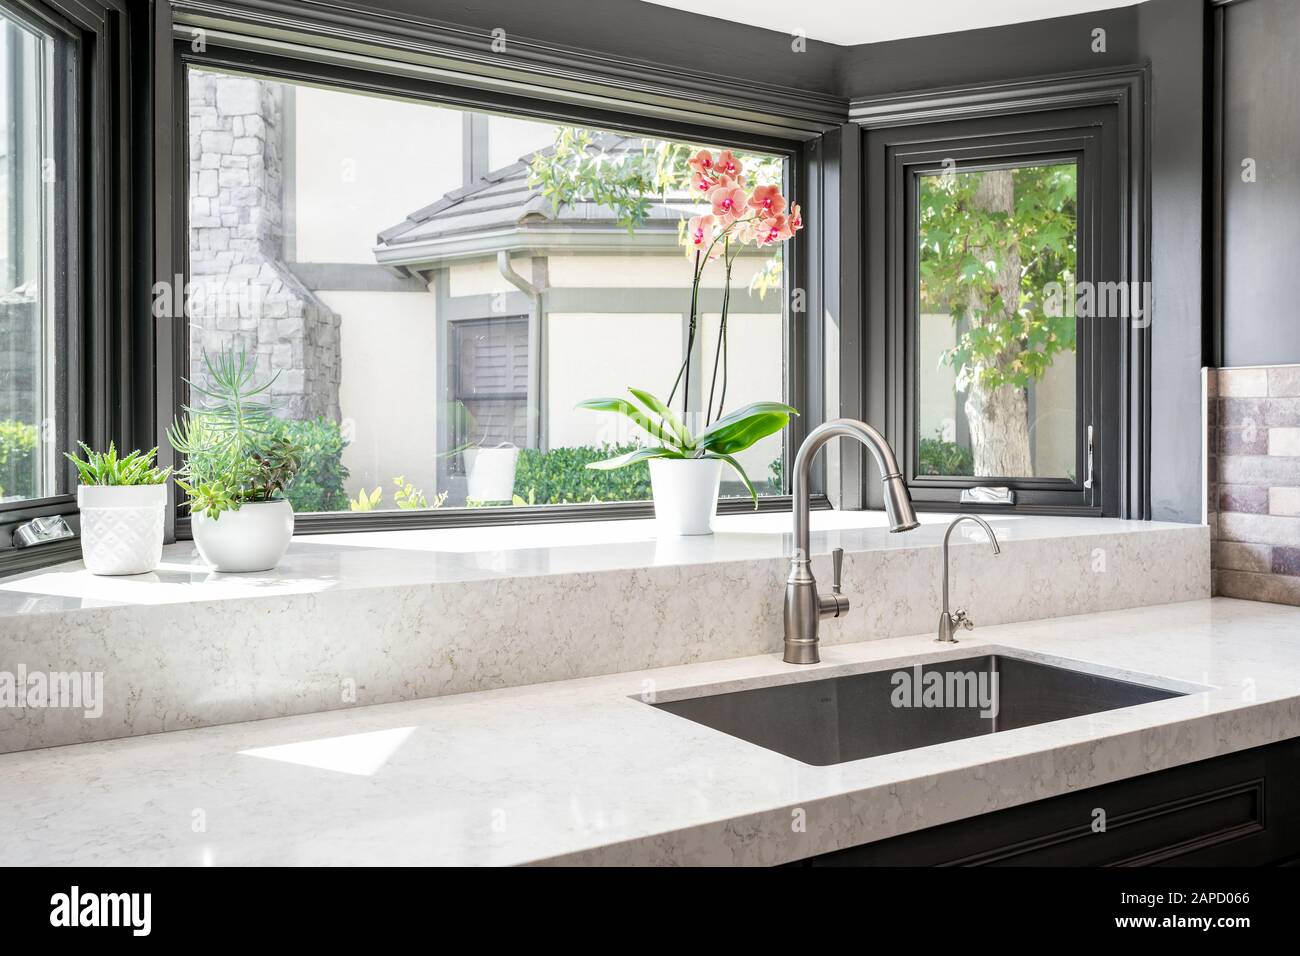 Kitchen counter and sink with large window Stock Photo